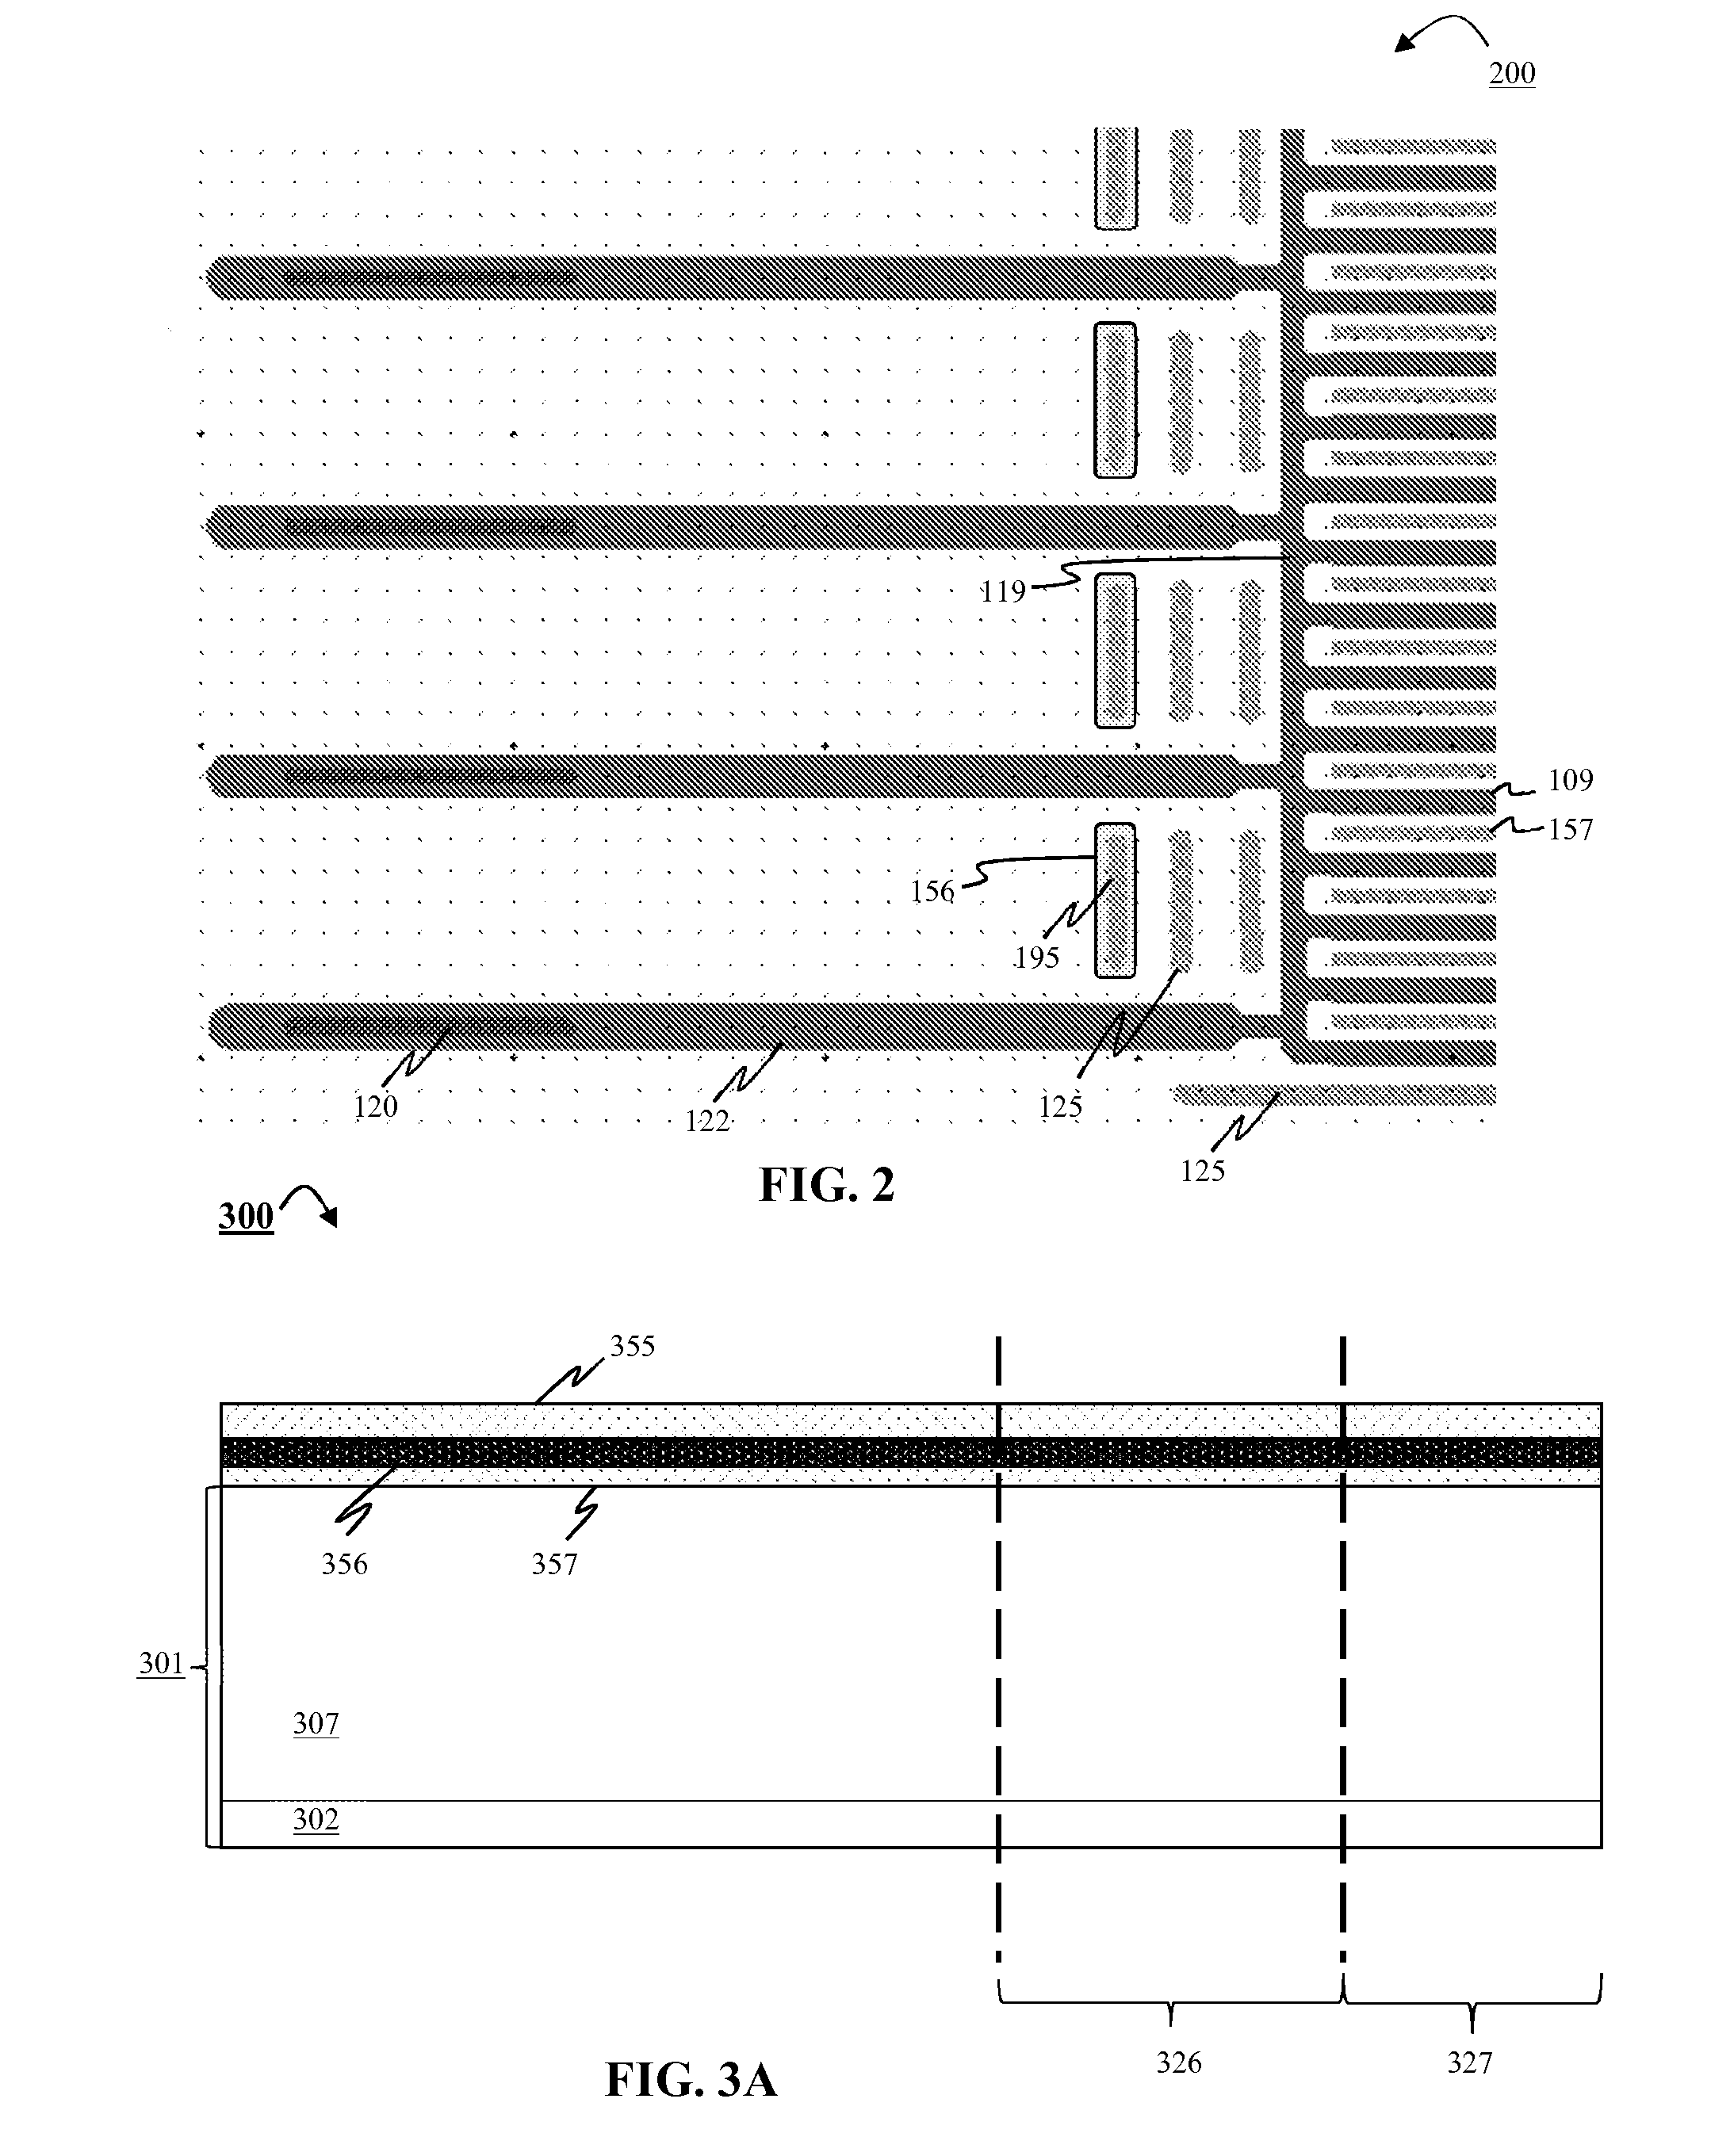 High density trench-based power mosfets with self-aligned active contacts and method for making such devices